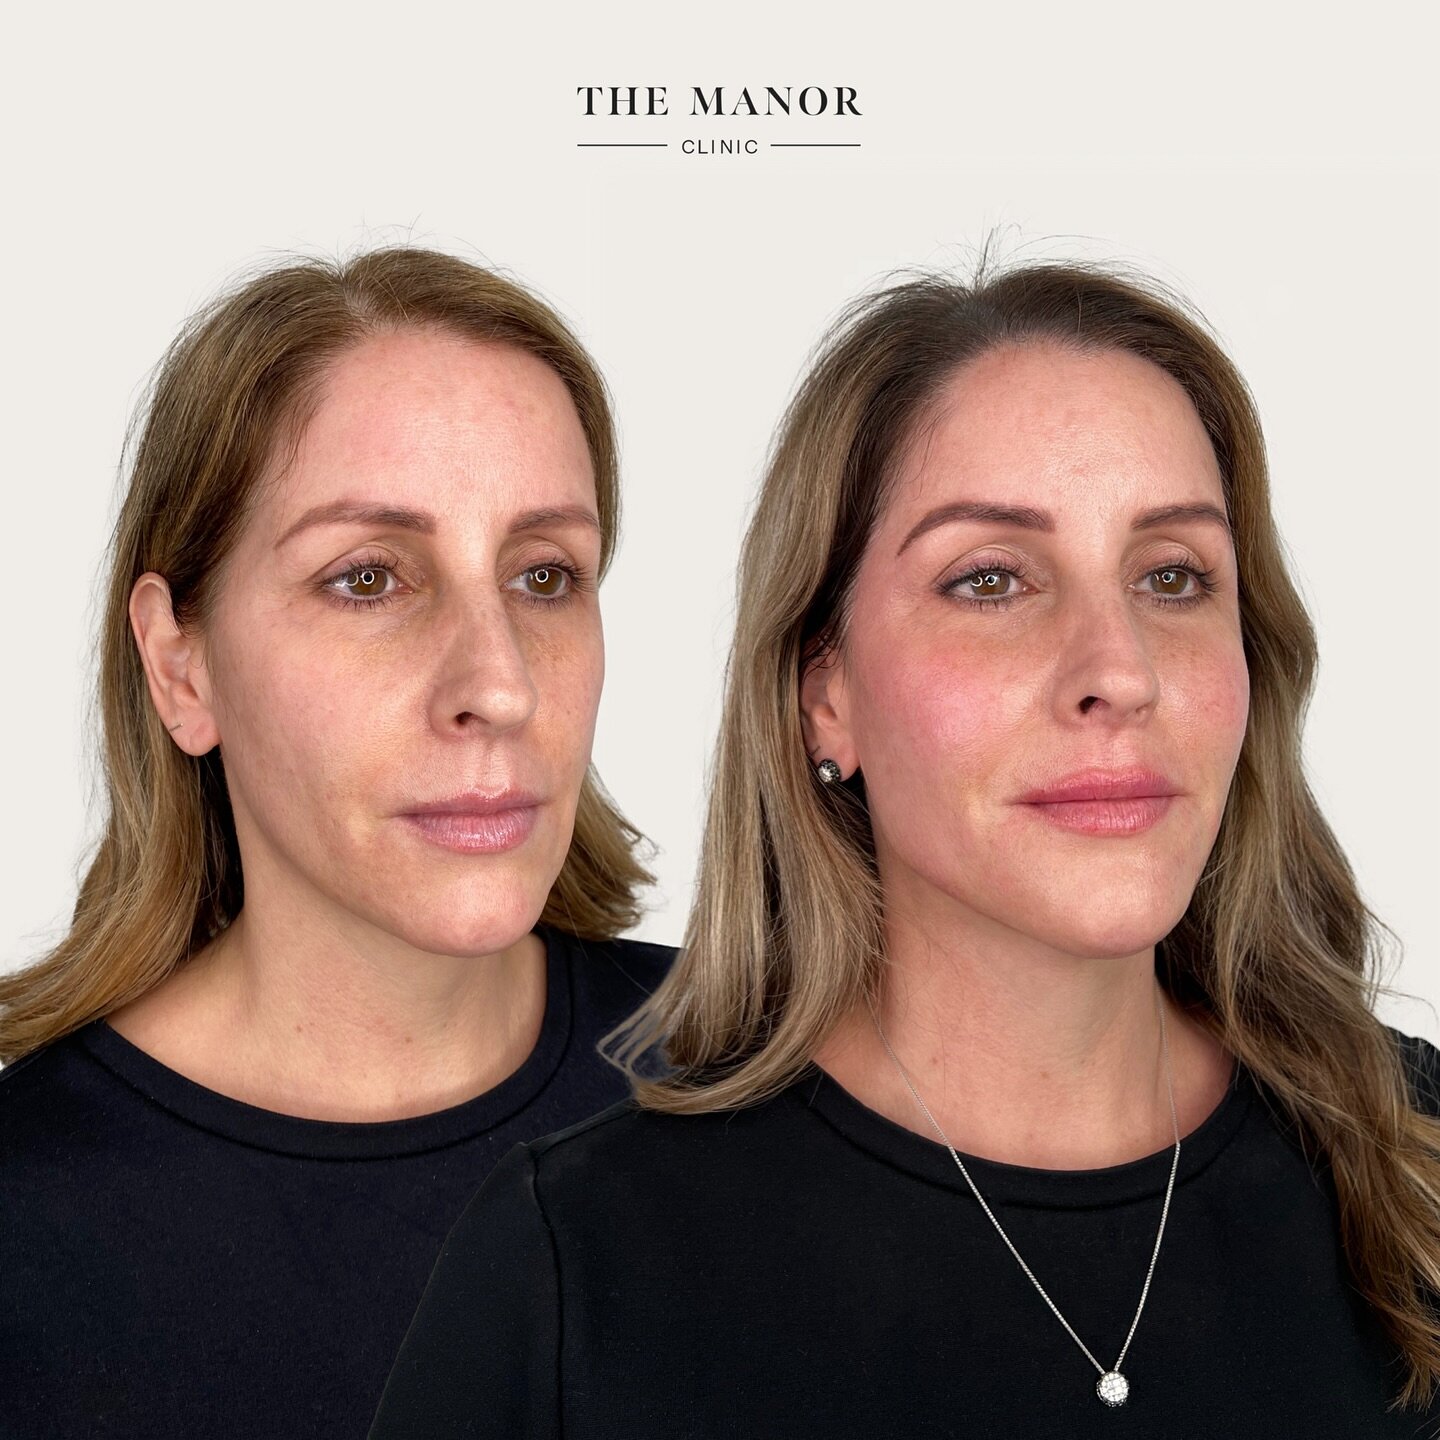 📝 Breaking the Rules&nbsp;📝&nbsp;

This vivacious woman started her journey at The Manor Clinic in April 2023 with the overarching objective of looking natural with noticeable results.&nbsp;

Treatment List:&nbsp;
▪️Temples
▪️Cheeks
▪️Jawline
▪️Chi